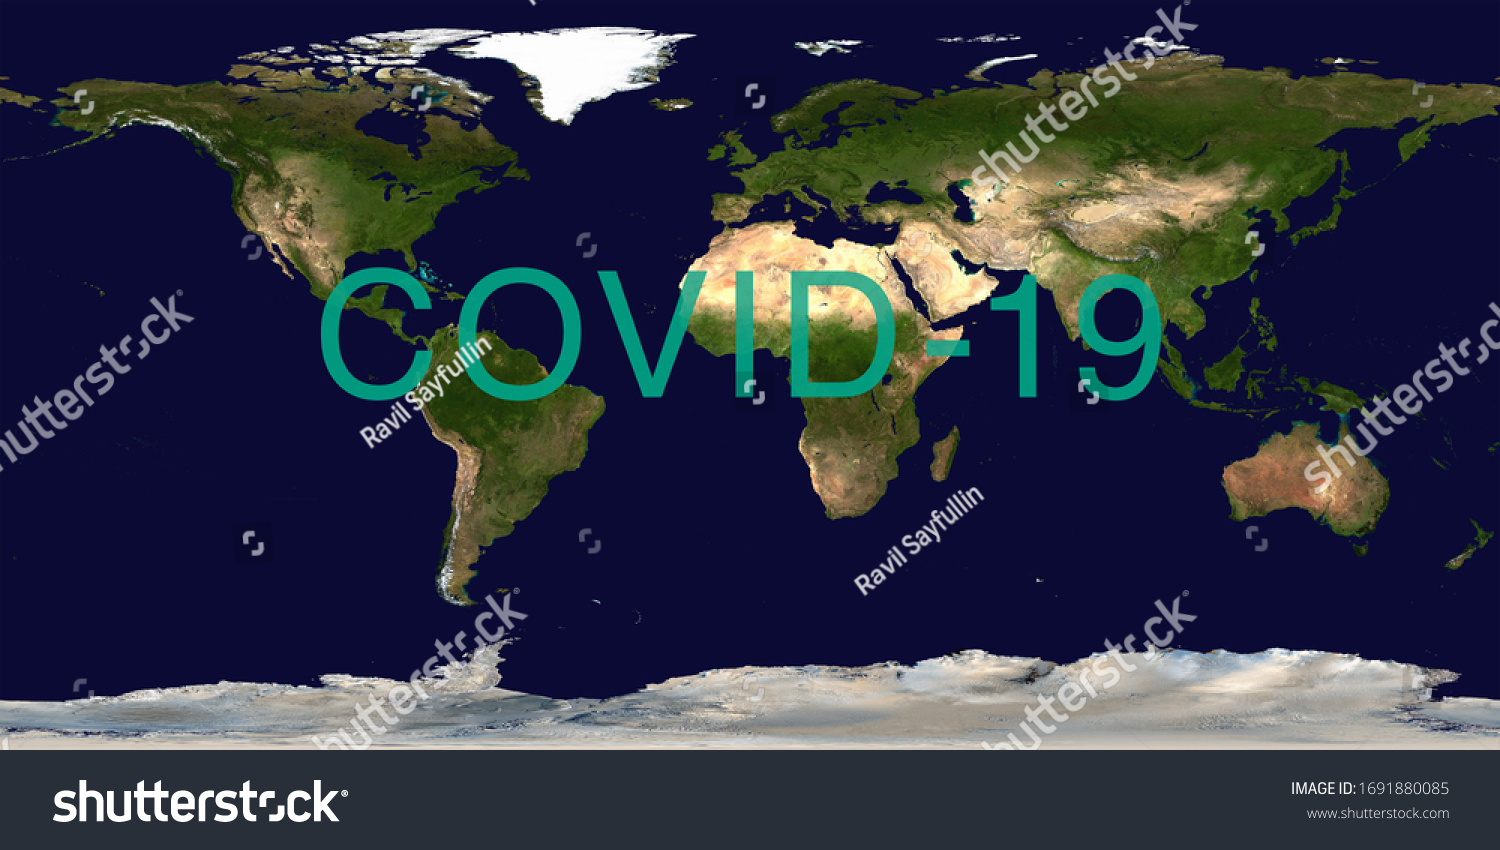 Coronavirus pandemic on world map. COVID-19 infection concept. Elements of this image furnished by NASA. #1691880085